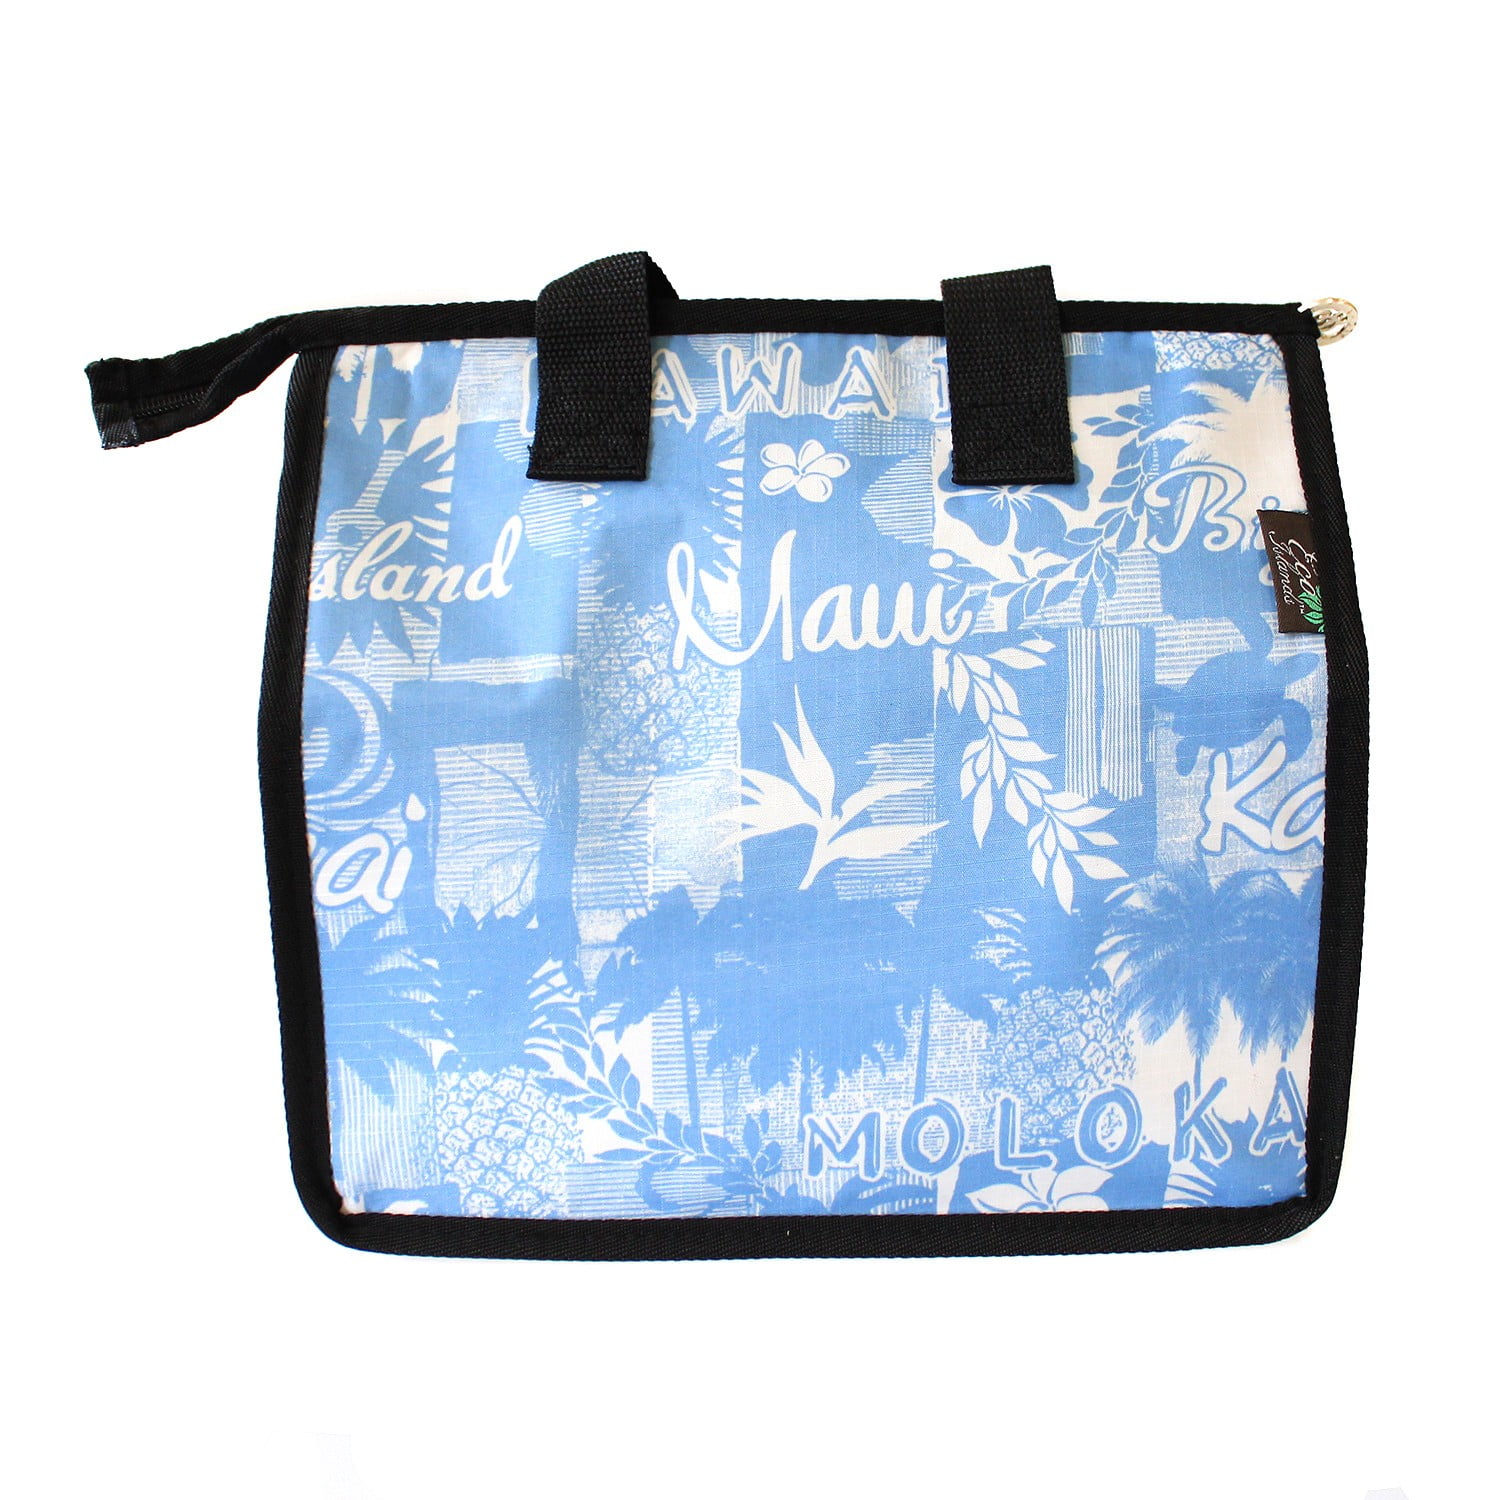 Thermal Insulated Cooler Bag Hawaiian Print Work Play Travel Sports Storage Tote 